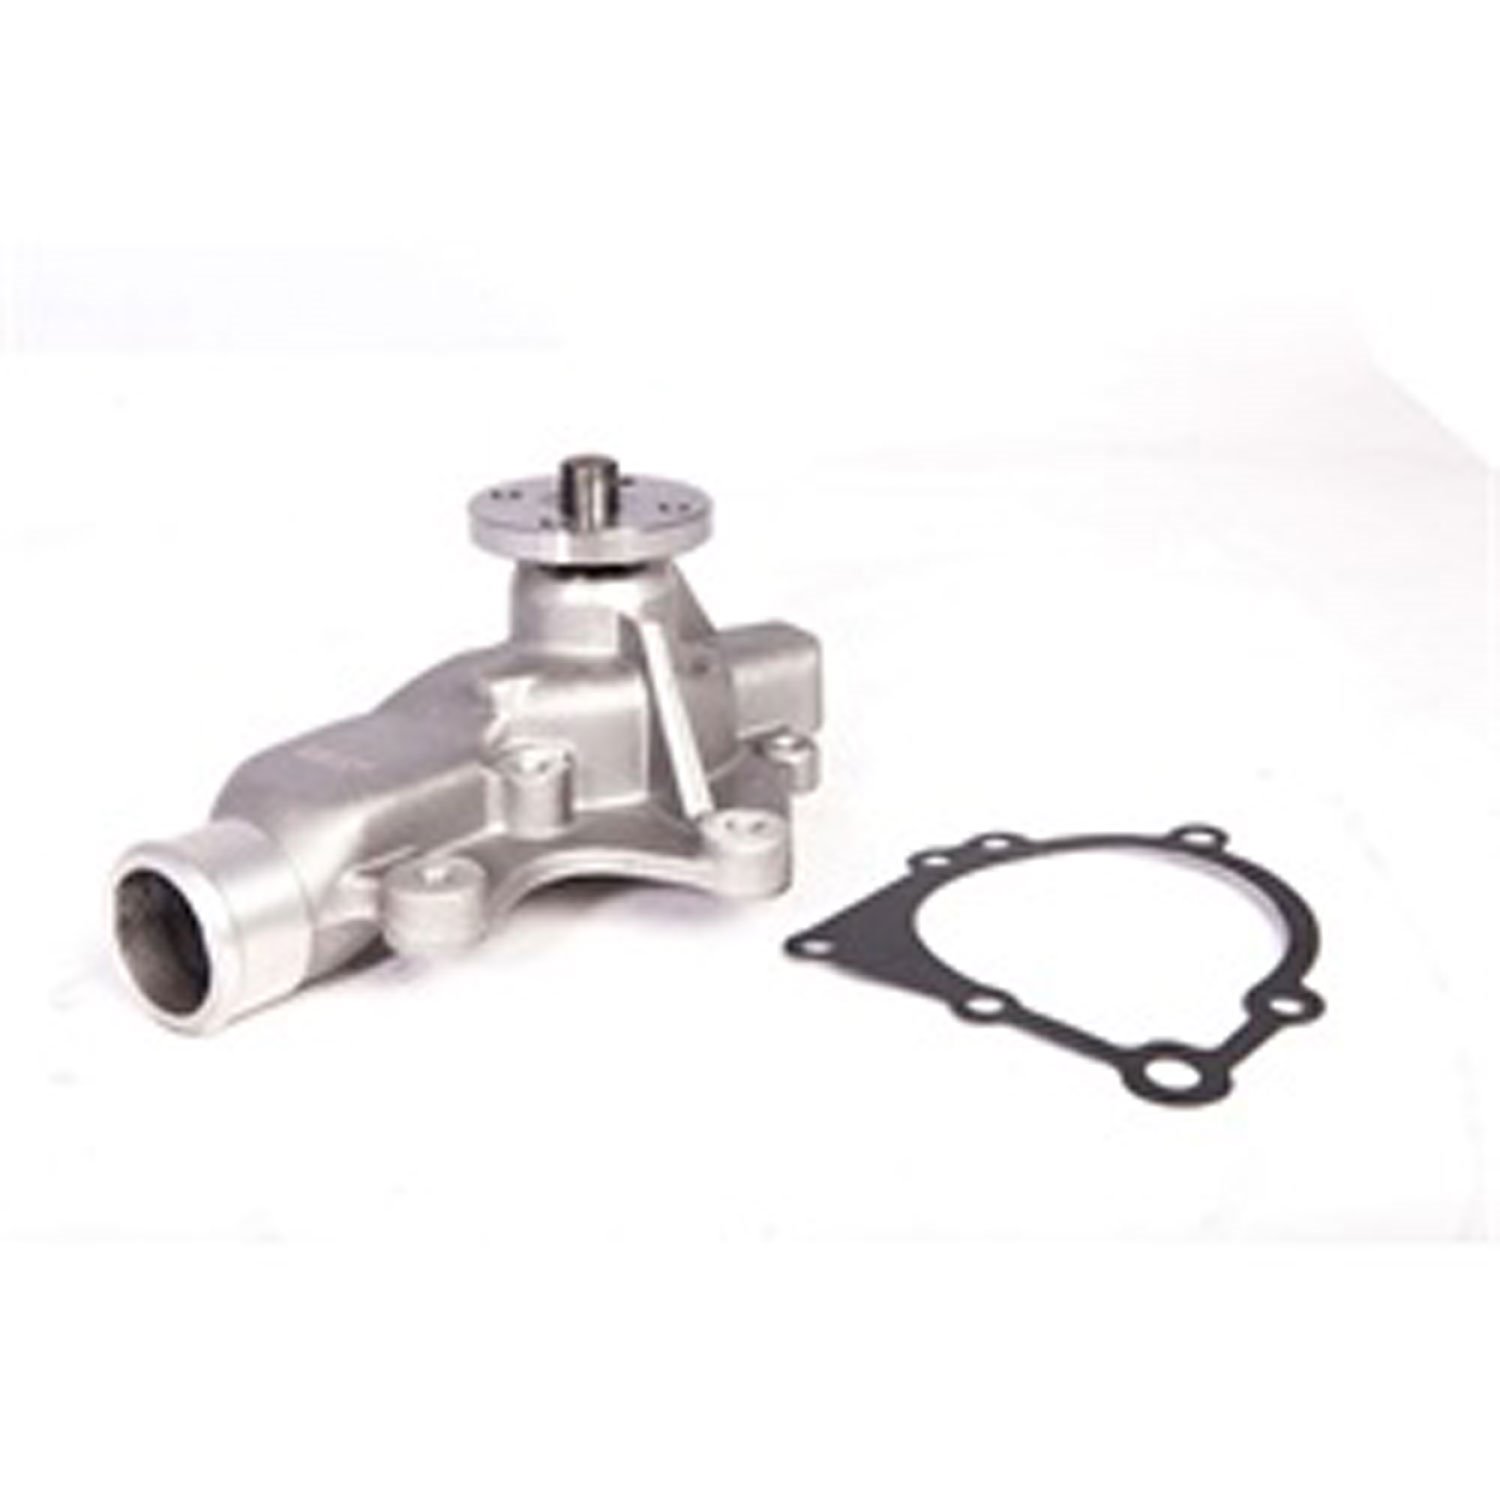 This water pump from Omix-ADA fits 91-00 Jeep Cherokees 91-01 Wranglers with a 2.5L 91-99 Wranglers